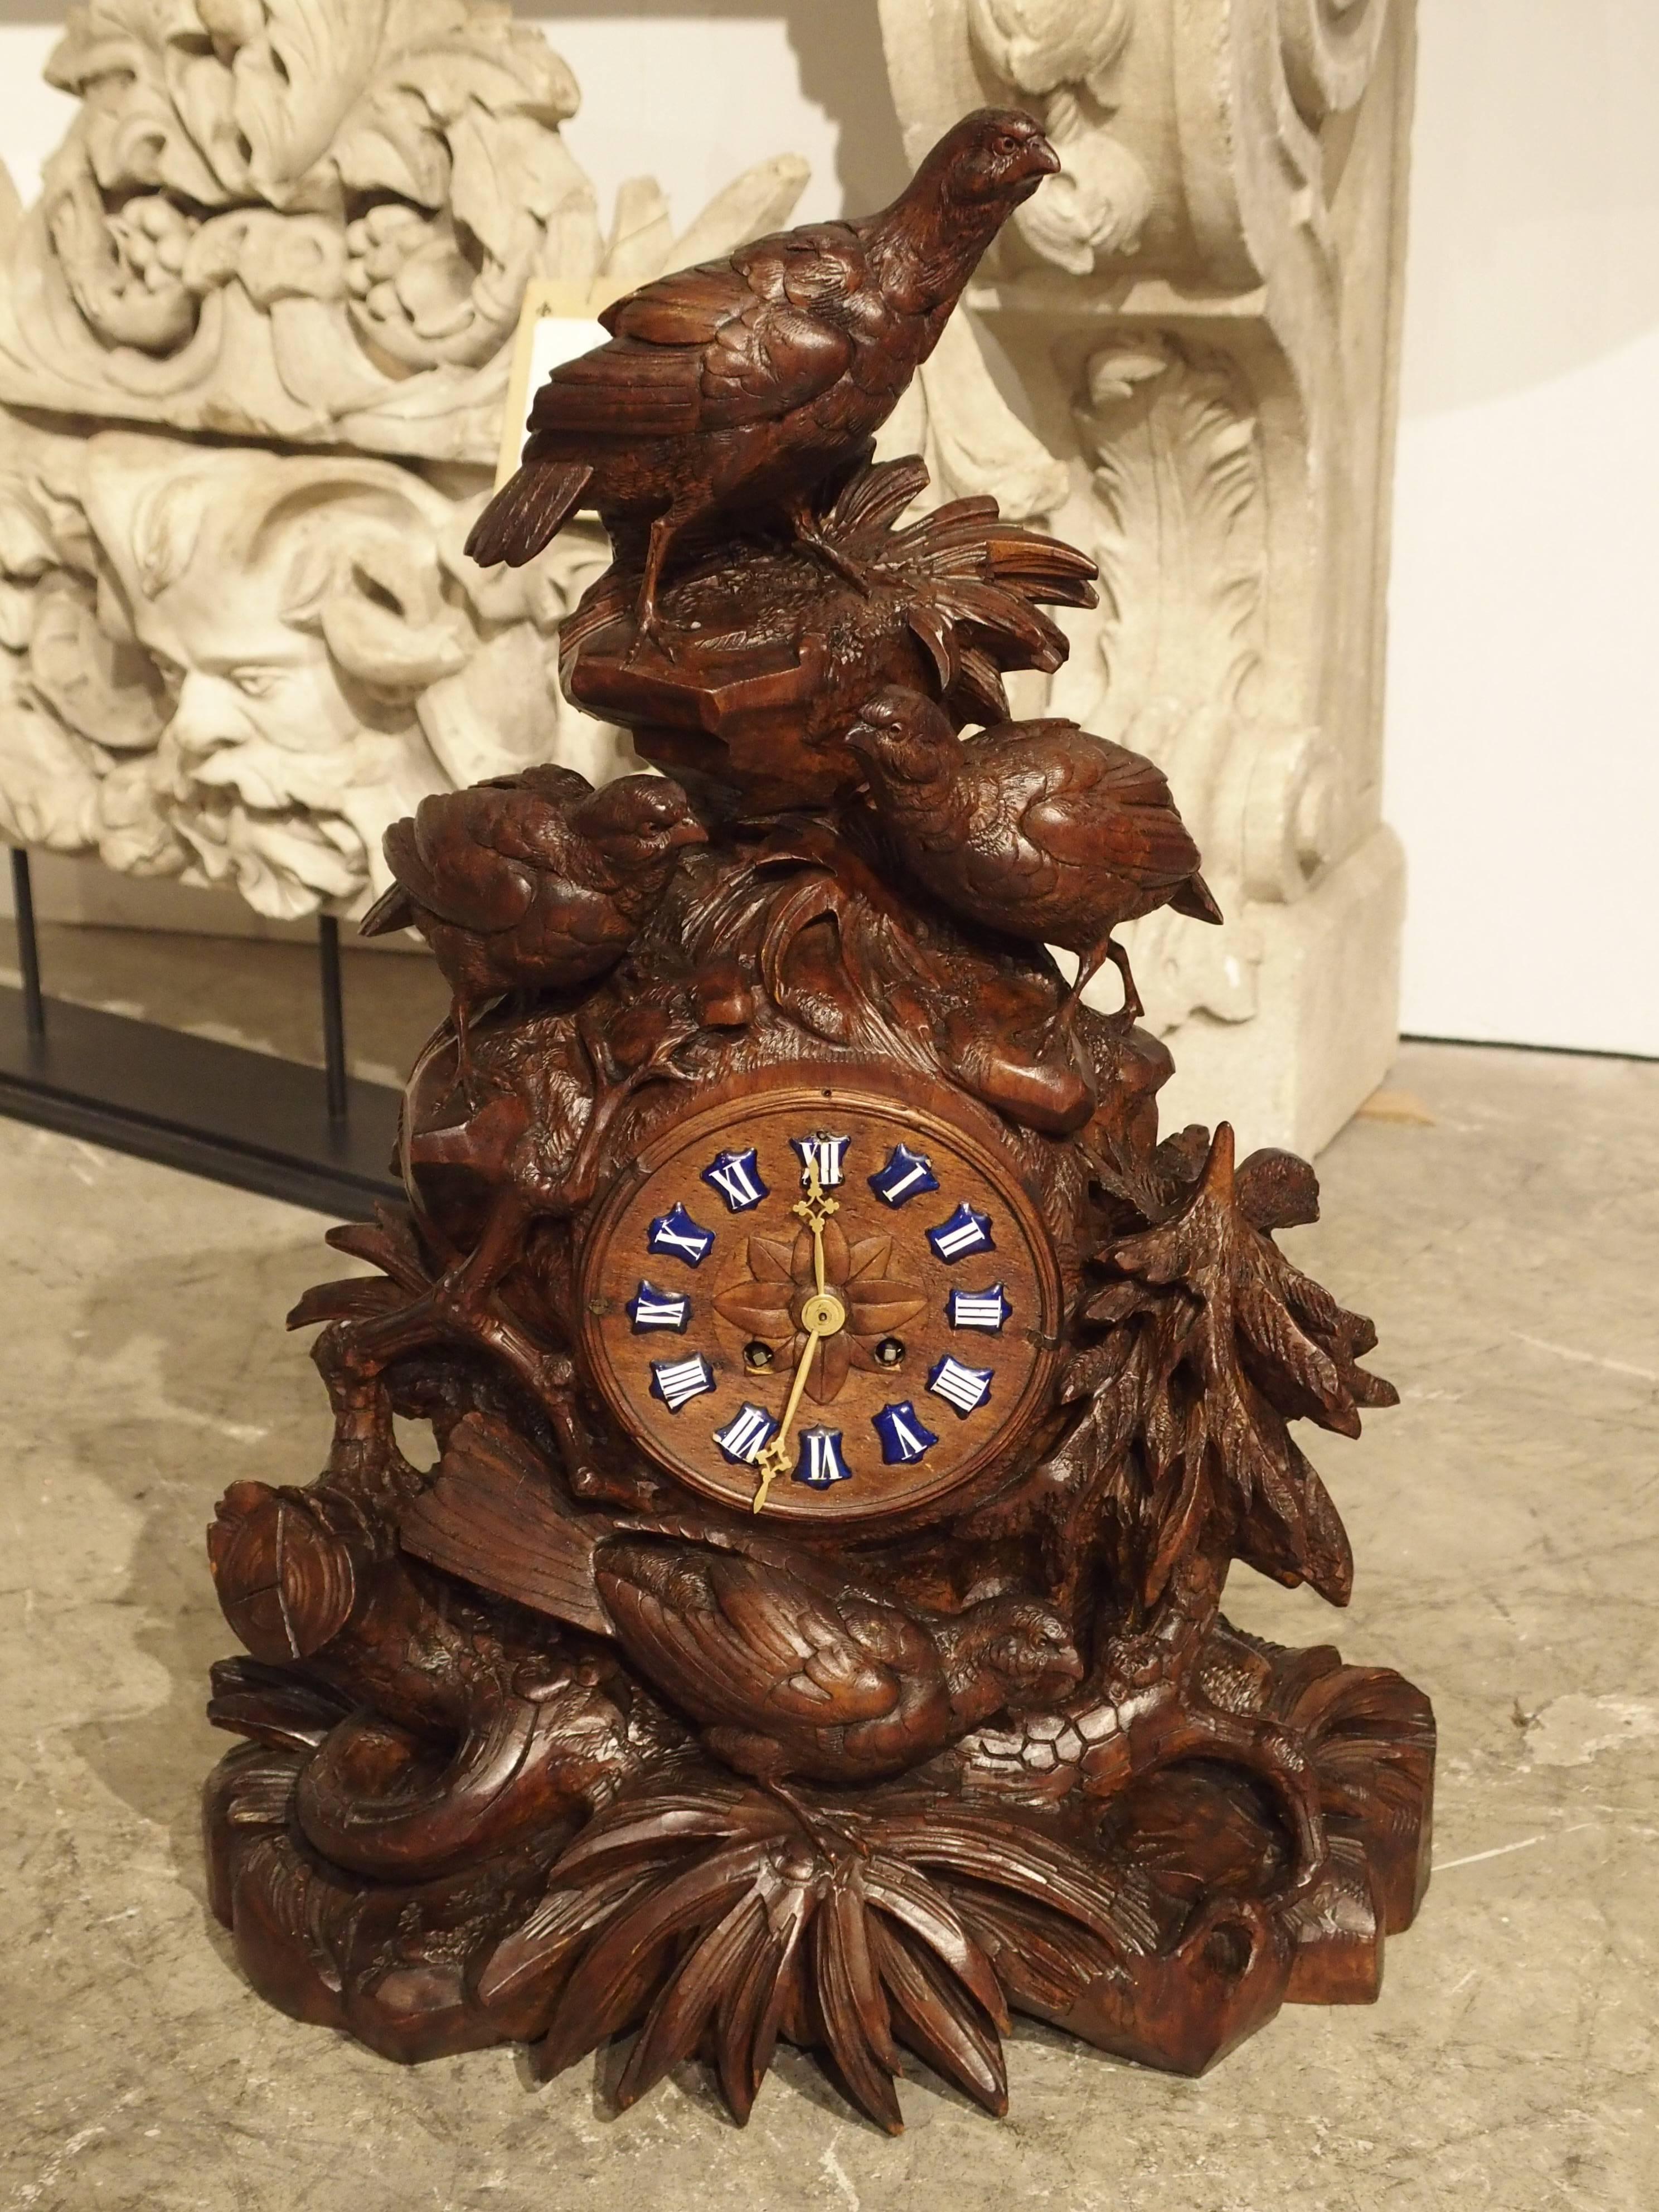 This wonderful hand-carved Black Forest mantel clock depicts four birds at varying levels on branches and leaves. It dates to circa 1880s, which puts it right in the period when Black Forest carvings were gaining popularity in Europe.

The